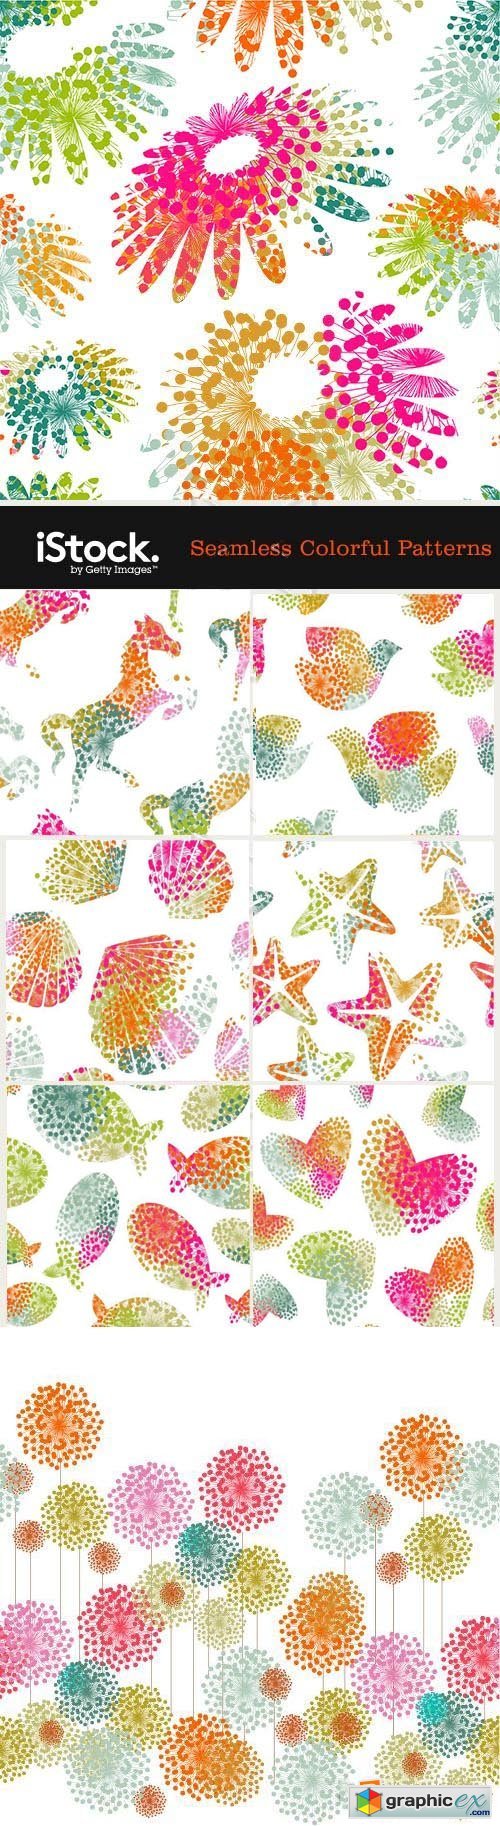 Seamless Colorful Patterns 19xEPS